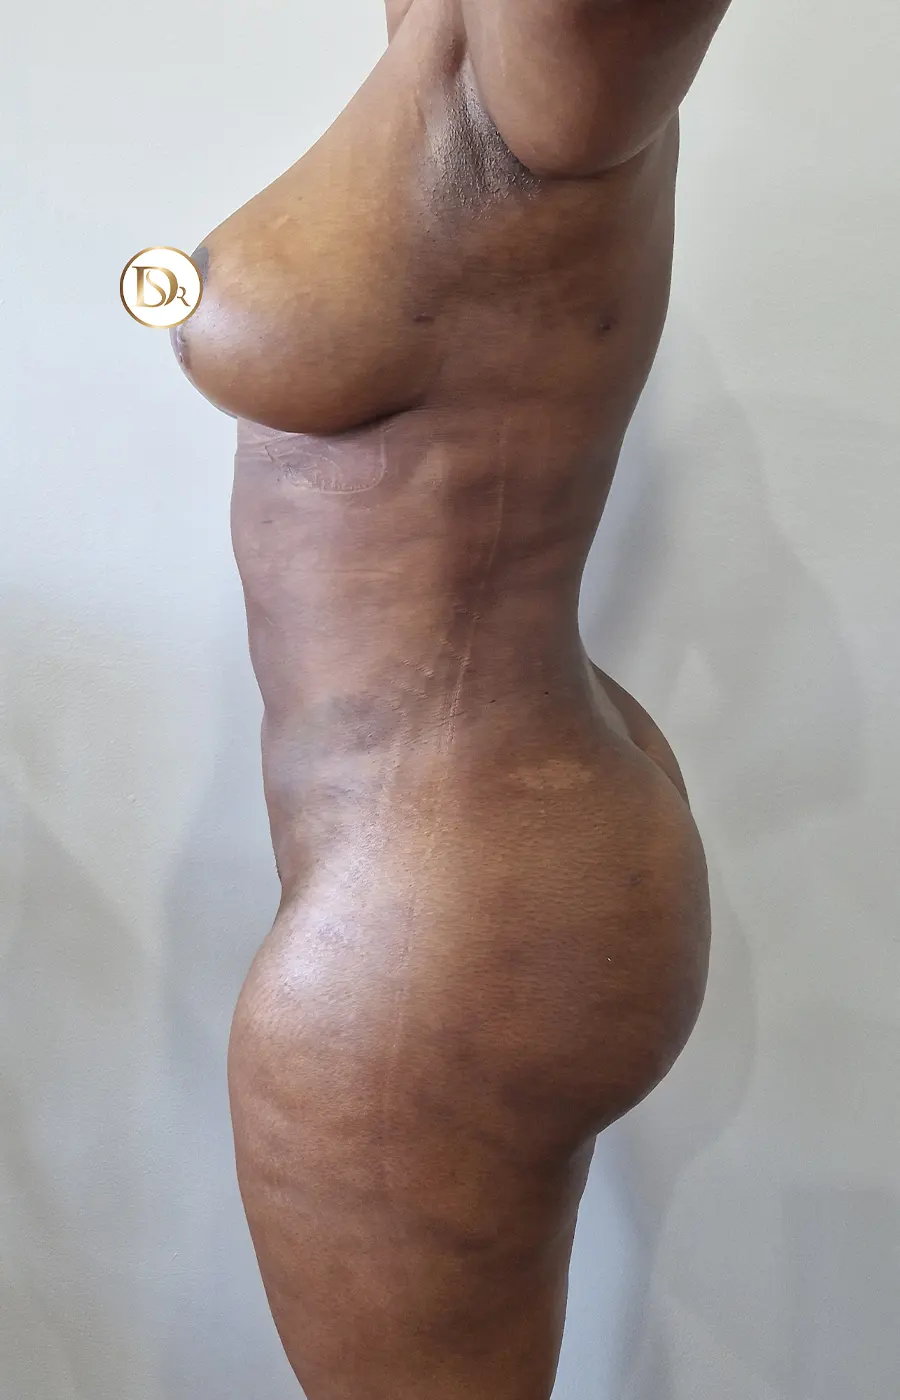 liposuction results after side